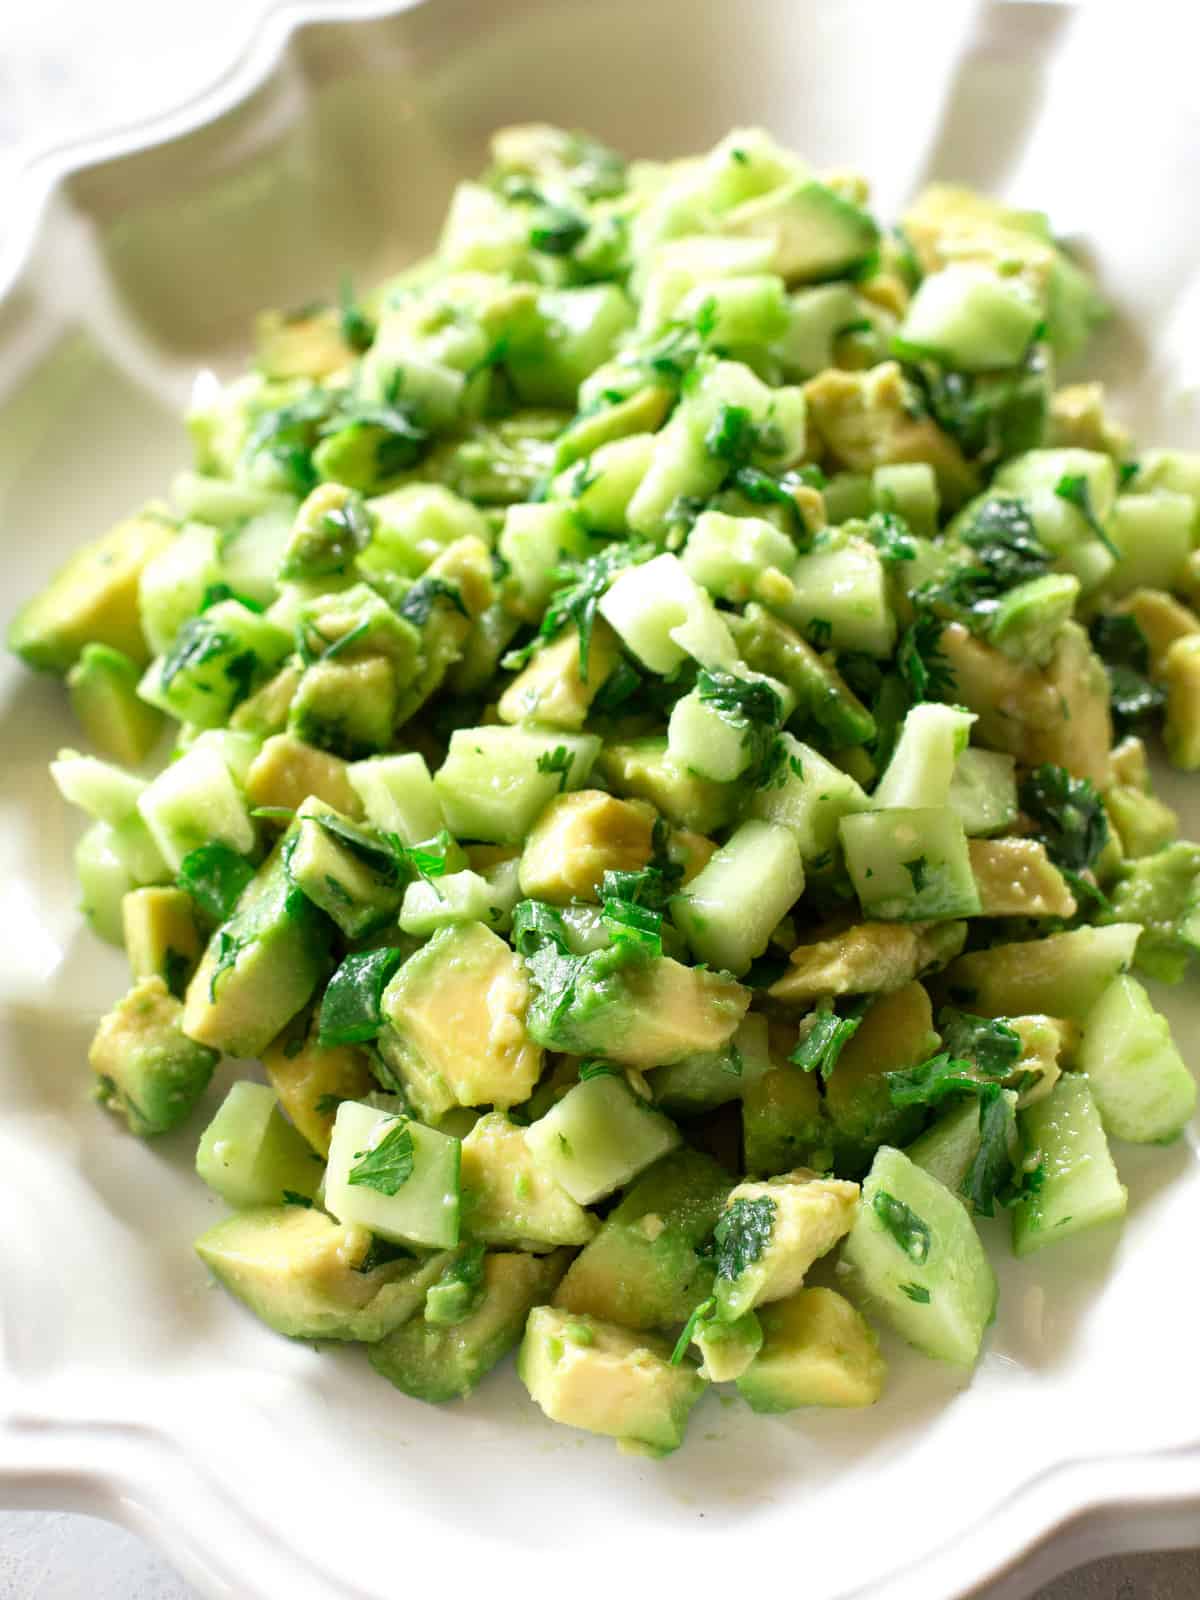 Healthy Cucumber Salad with Cilantro and Lime